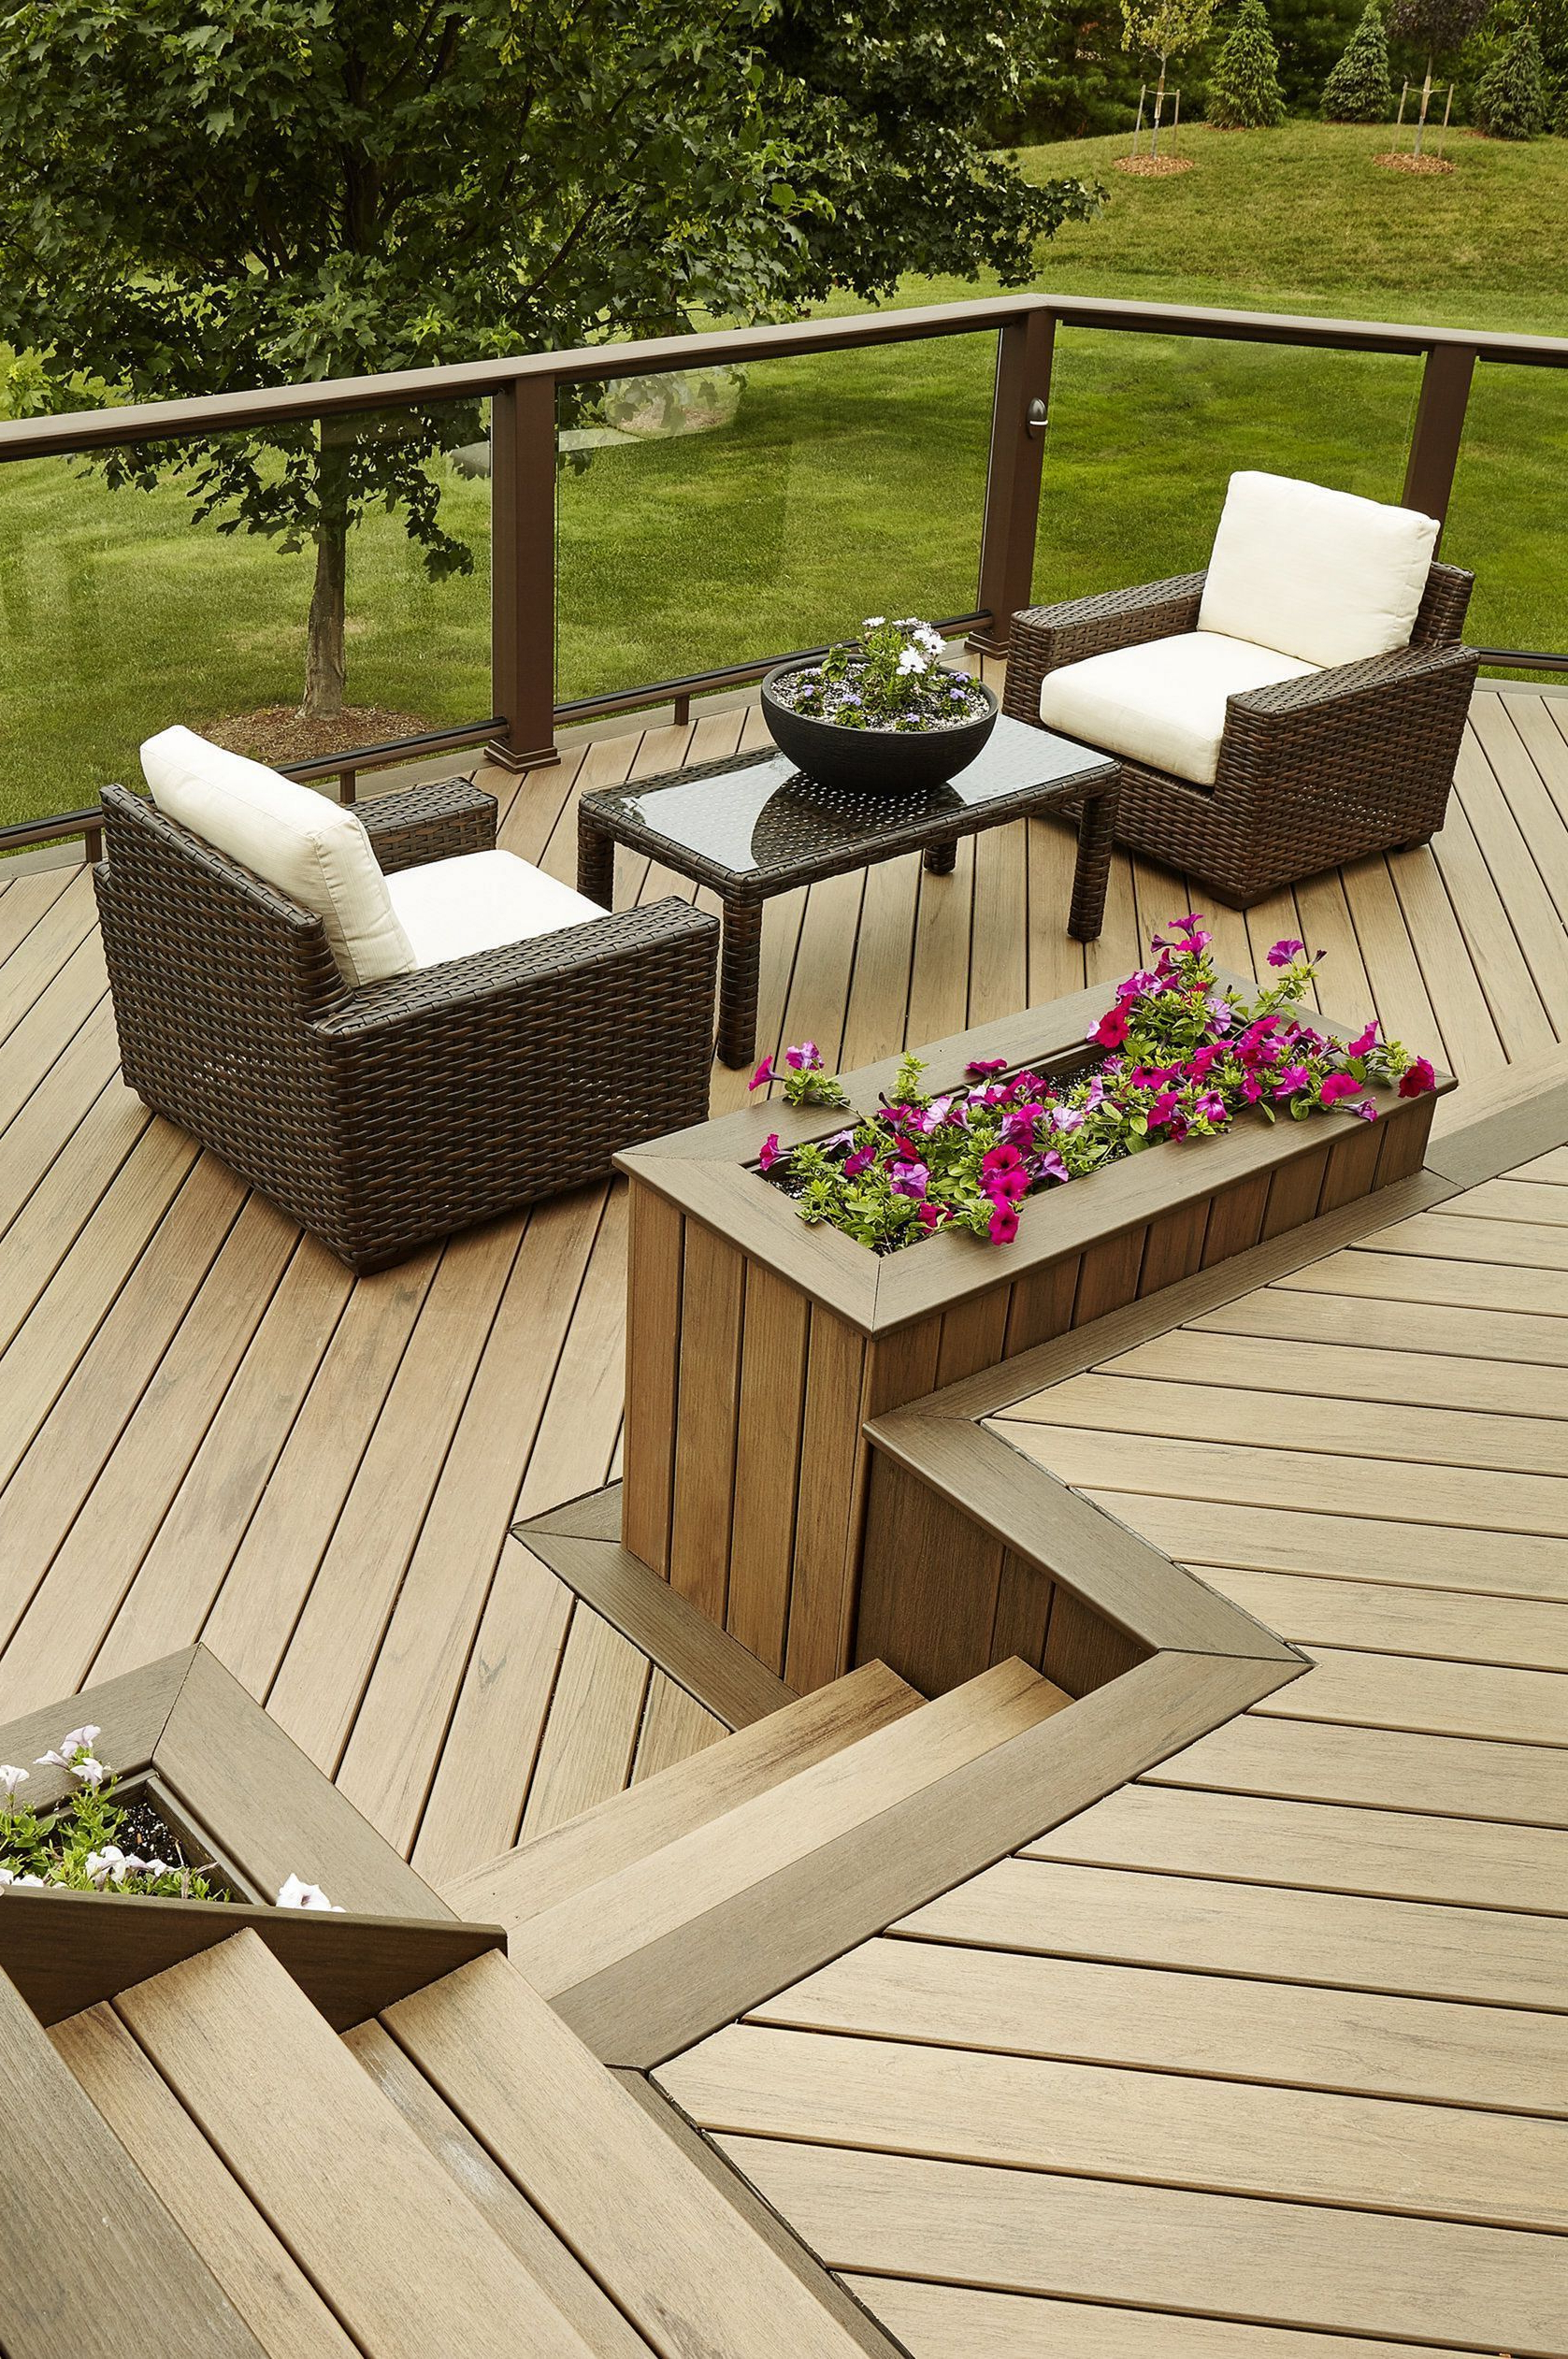 Unbelievable Outdoor Deck Ideas For Cozy Relaxing Place